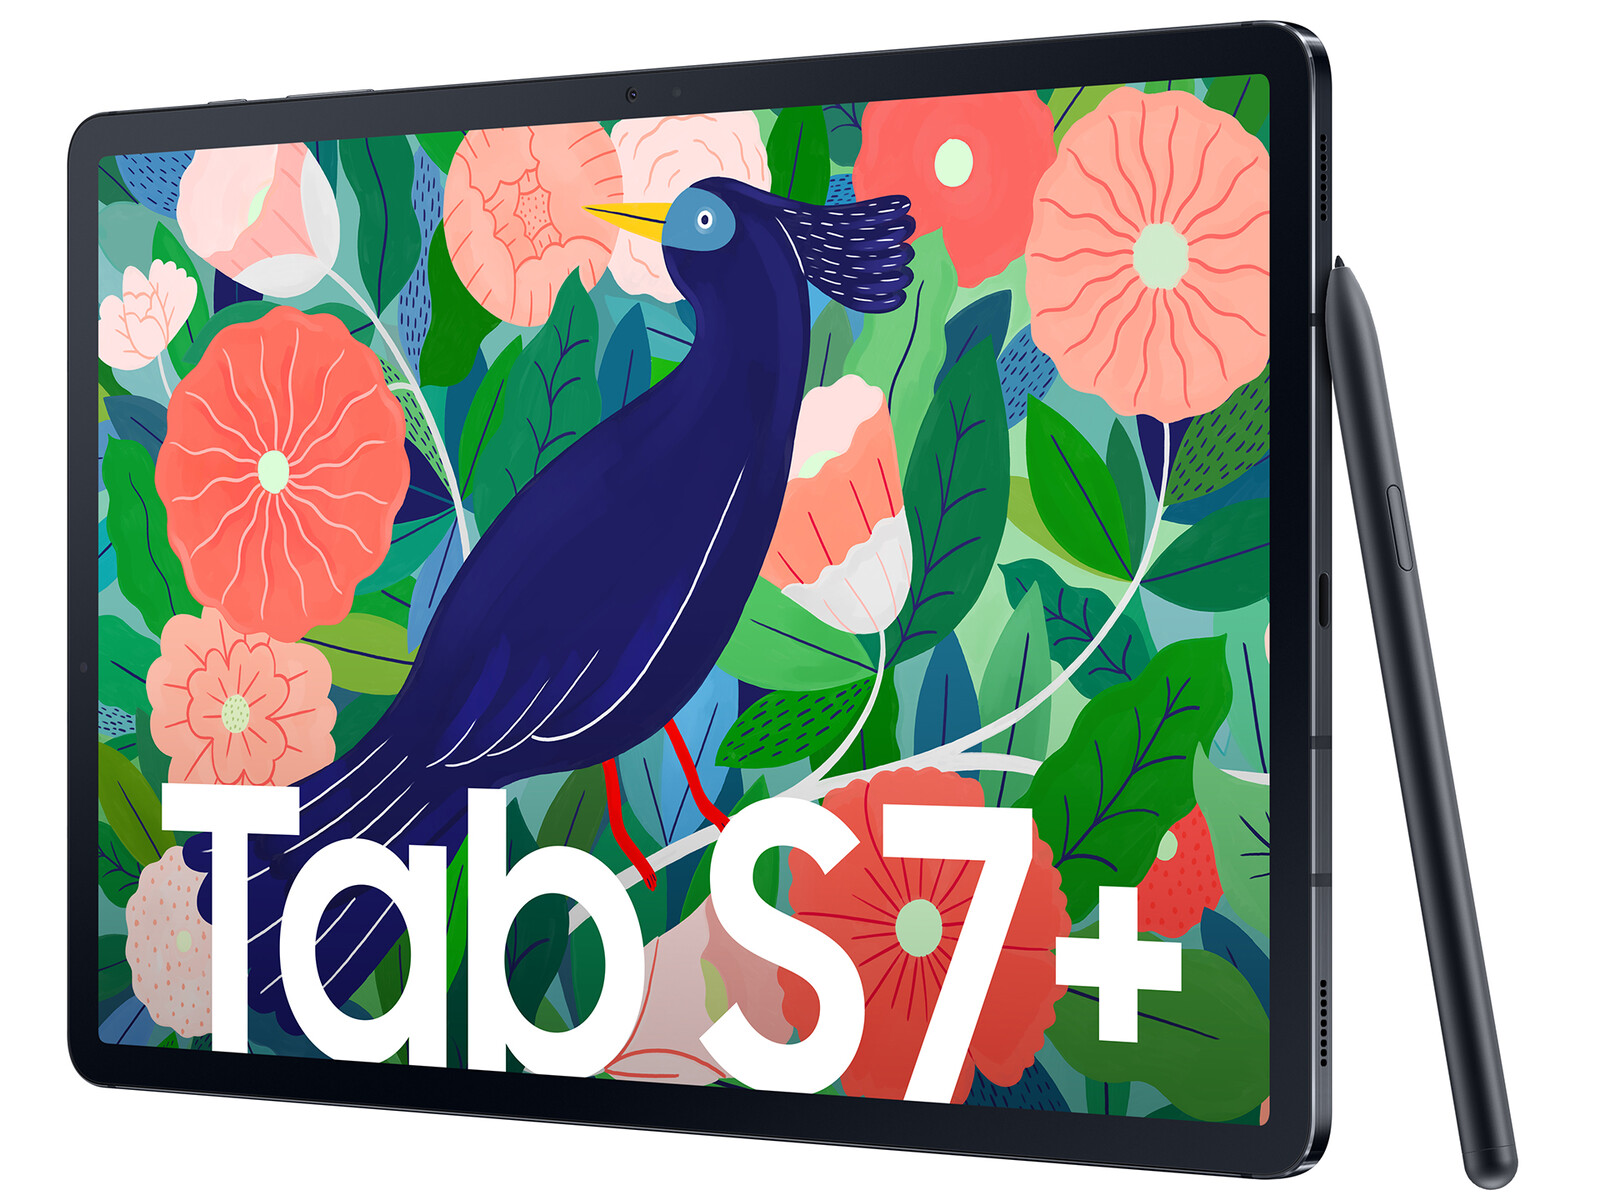 Best Android tablets of 2021